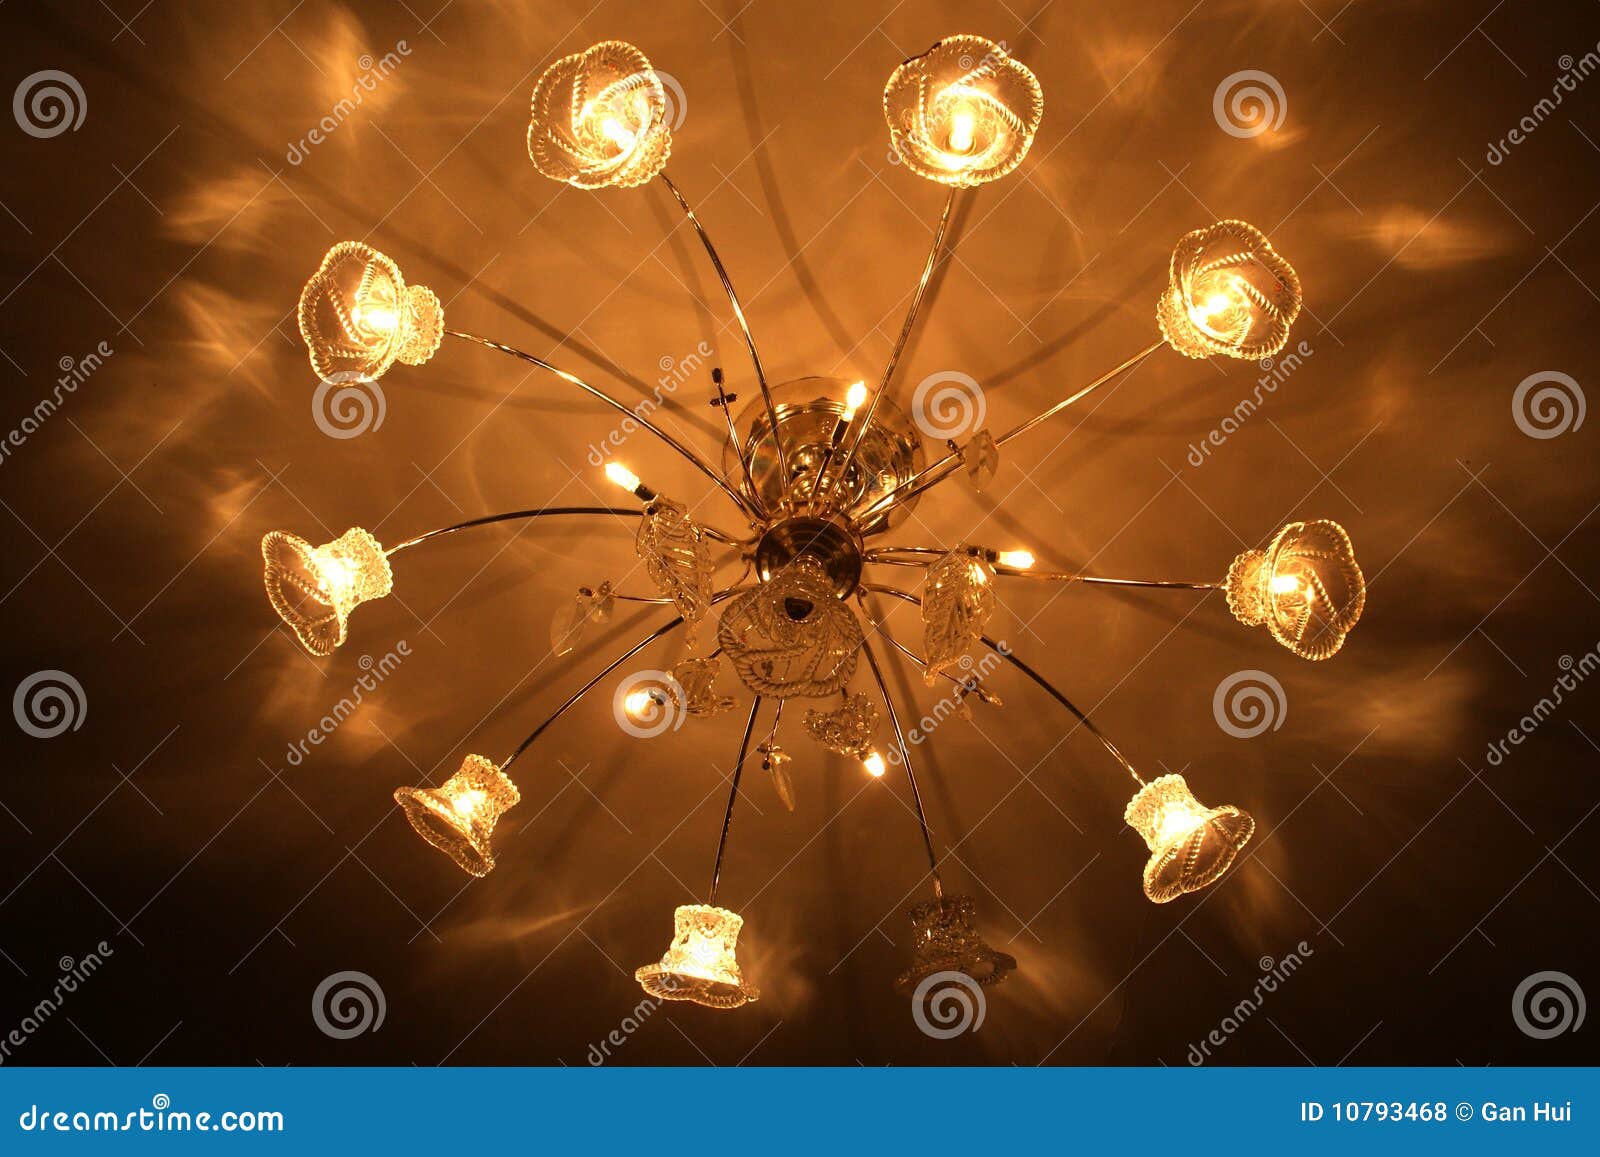 Yellow Hotel Lights on the Ceiling Stock Photo - Image of expensive ...